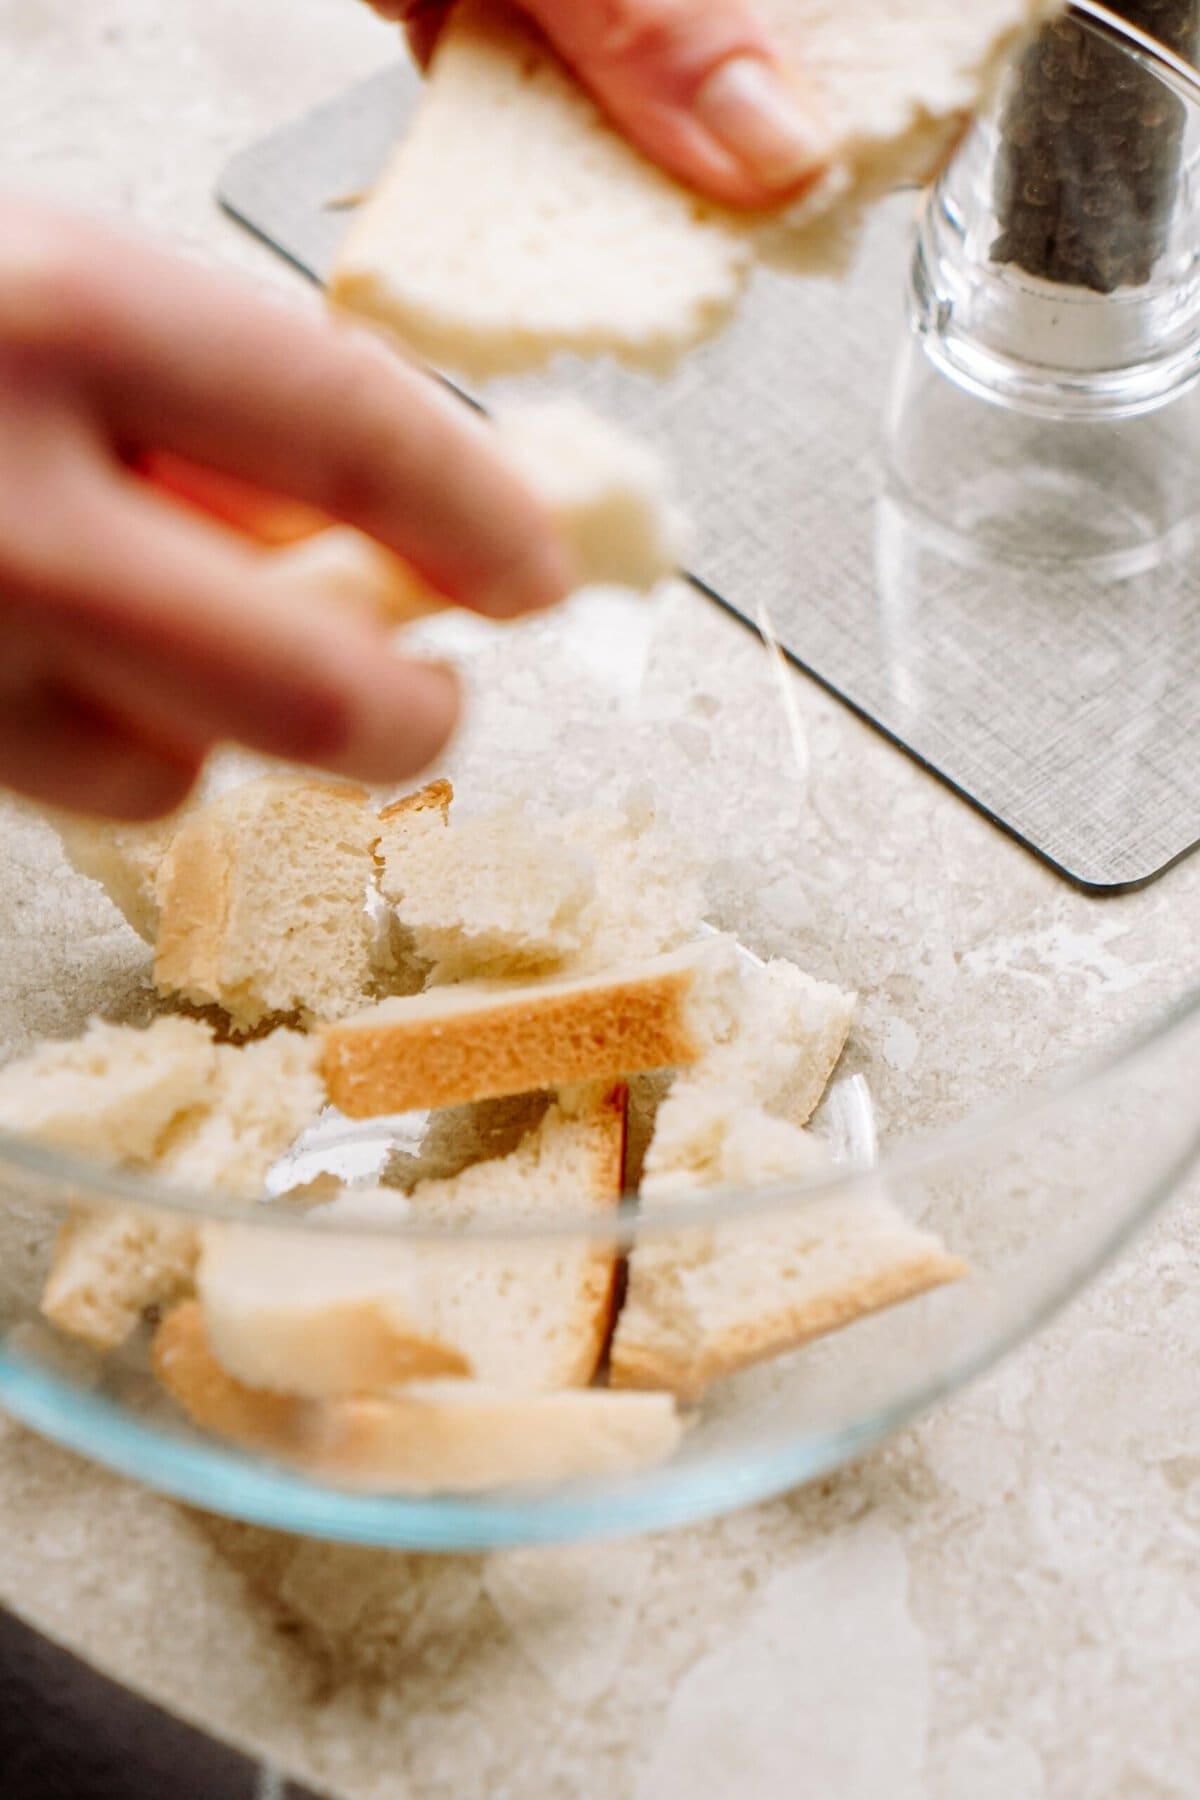 Person tearing bread into smaller pieces over a glass bowl.